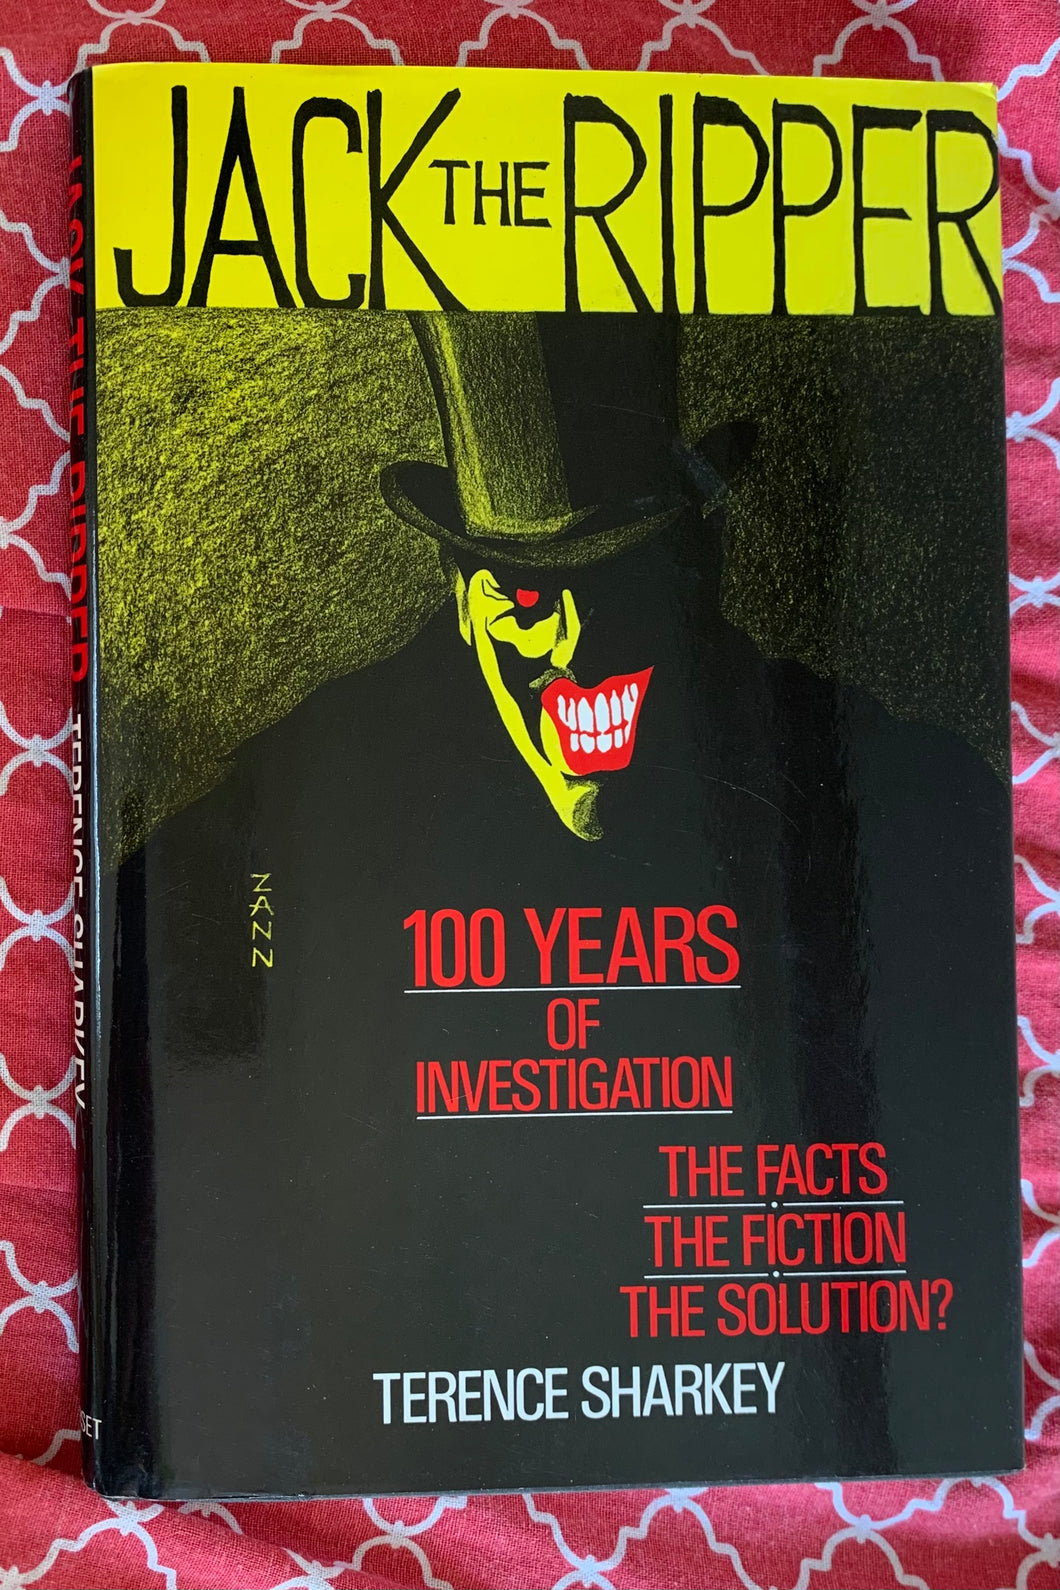 Jack the Ripper: 100 Years of Investigation